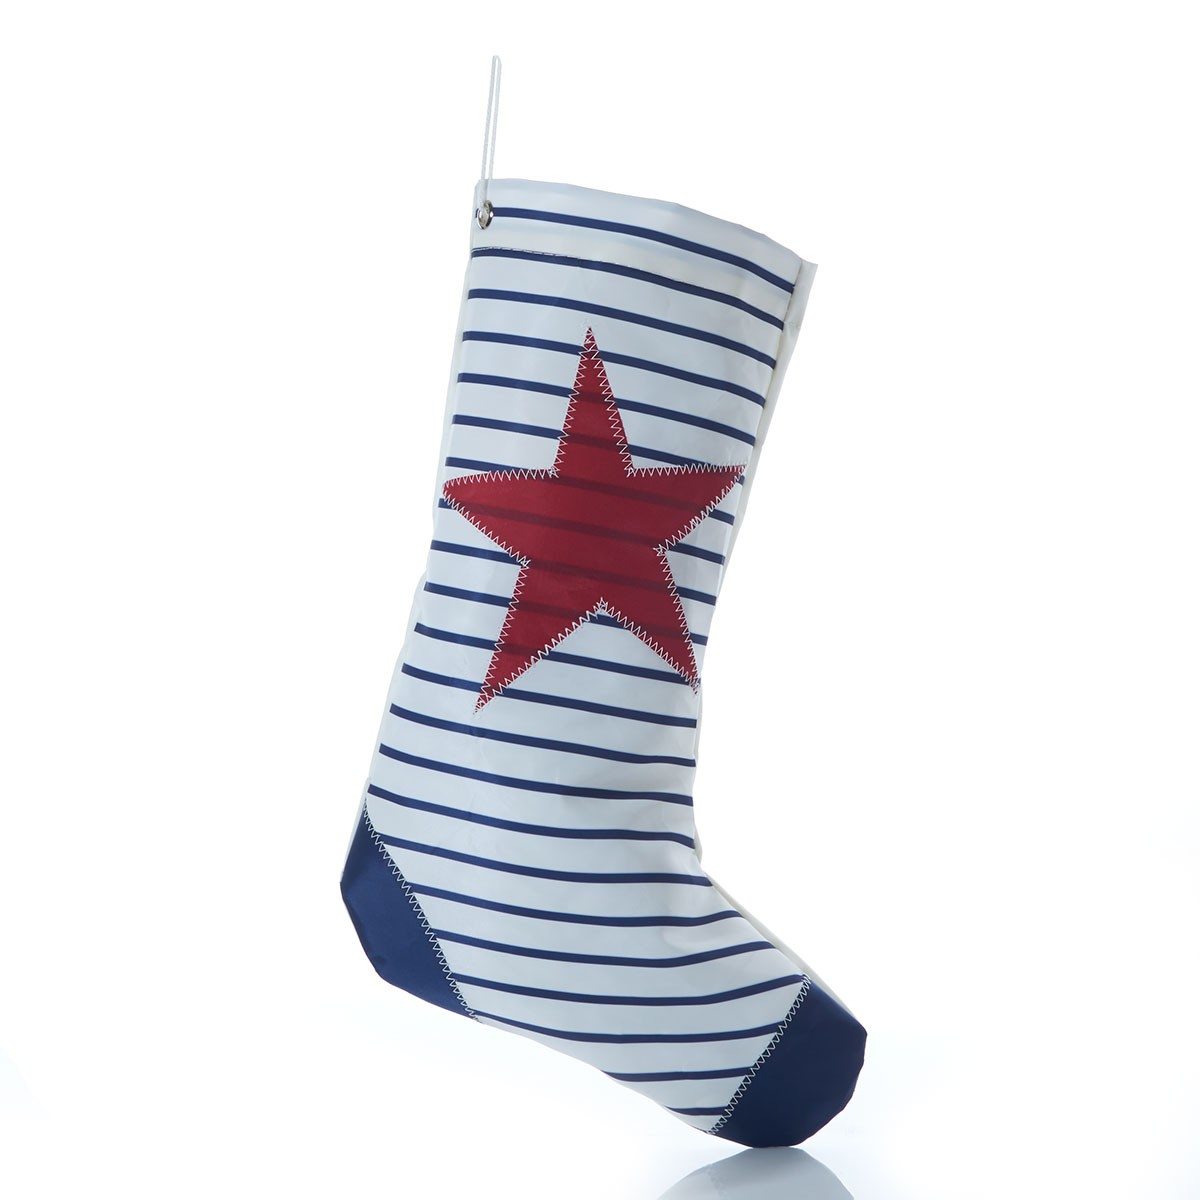 Sea Bags Red Star on Navy Stripe Stocking